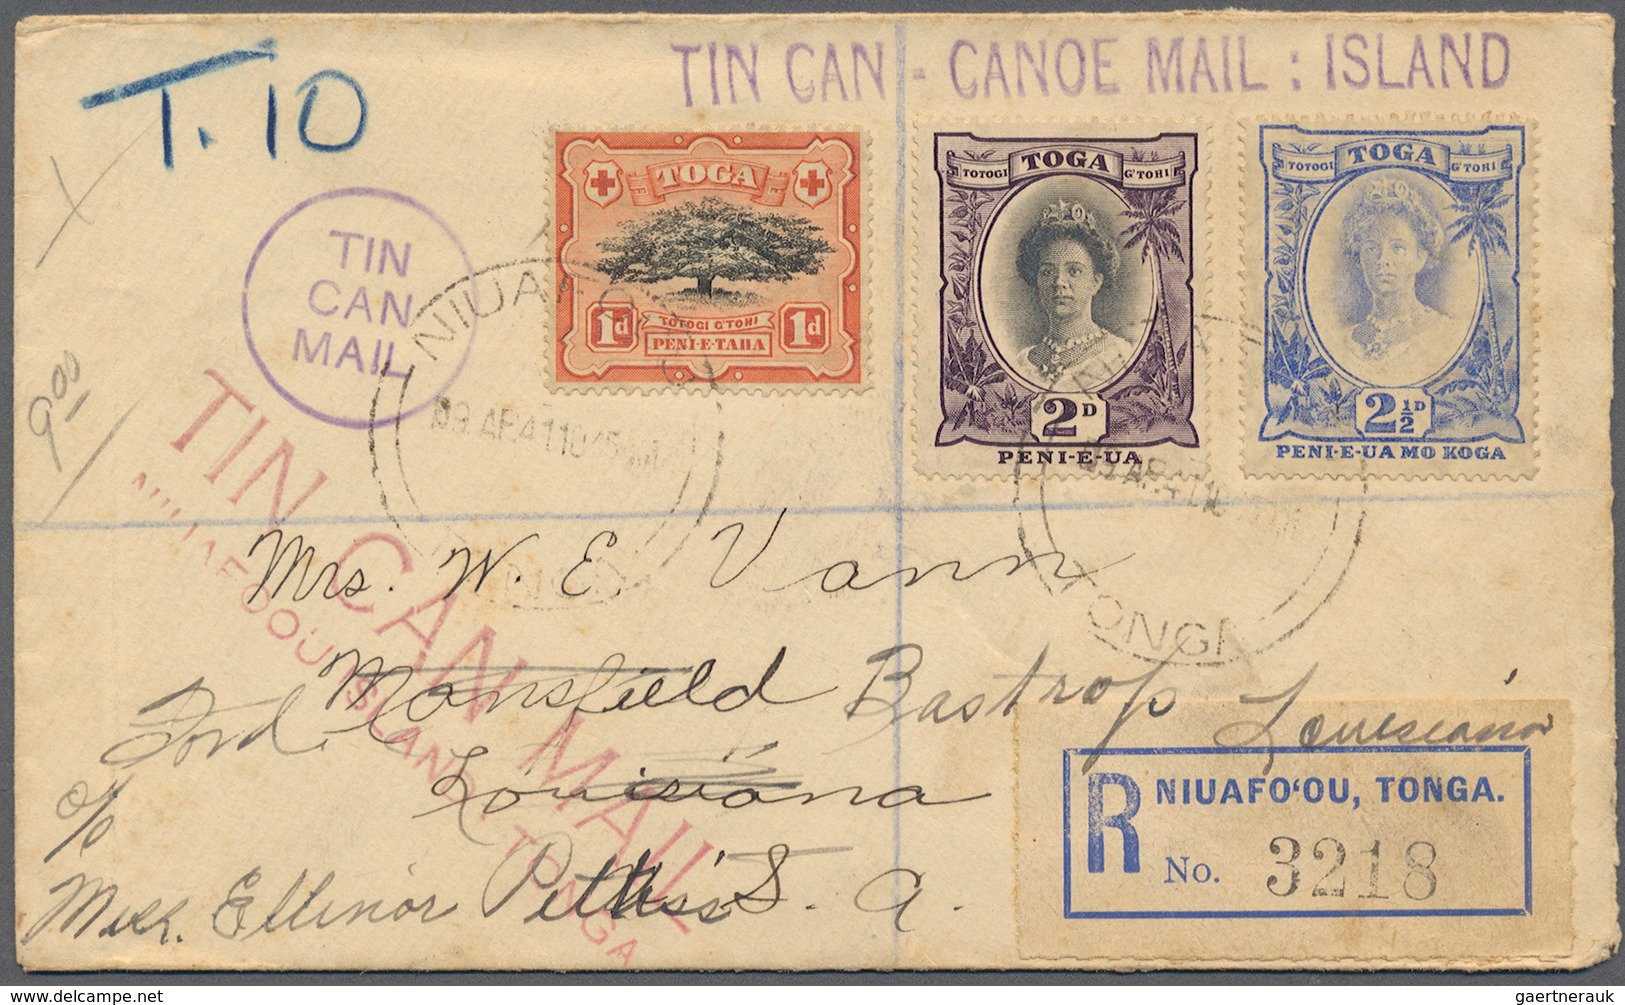 Tonga: 1900/2005, collection of apprx. 400 covers and cards, housed in 4 albums, comprising a surpri